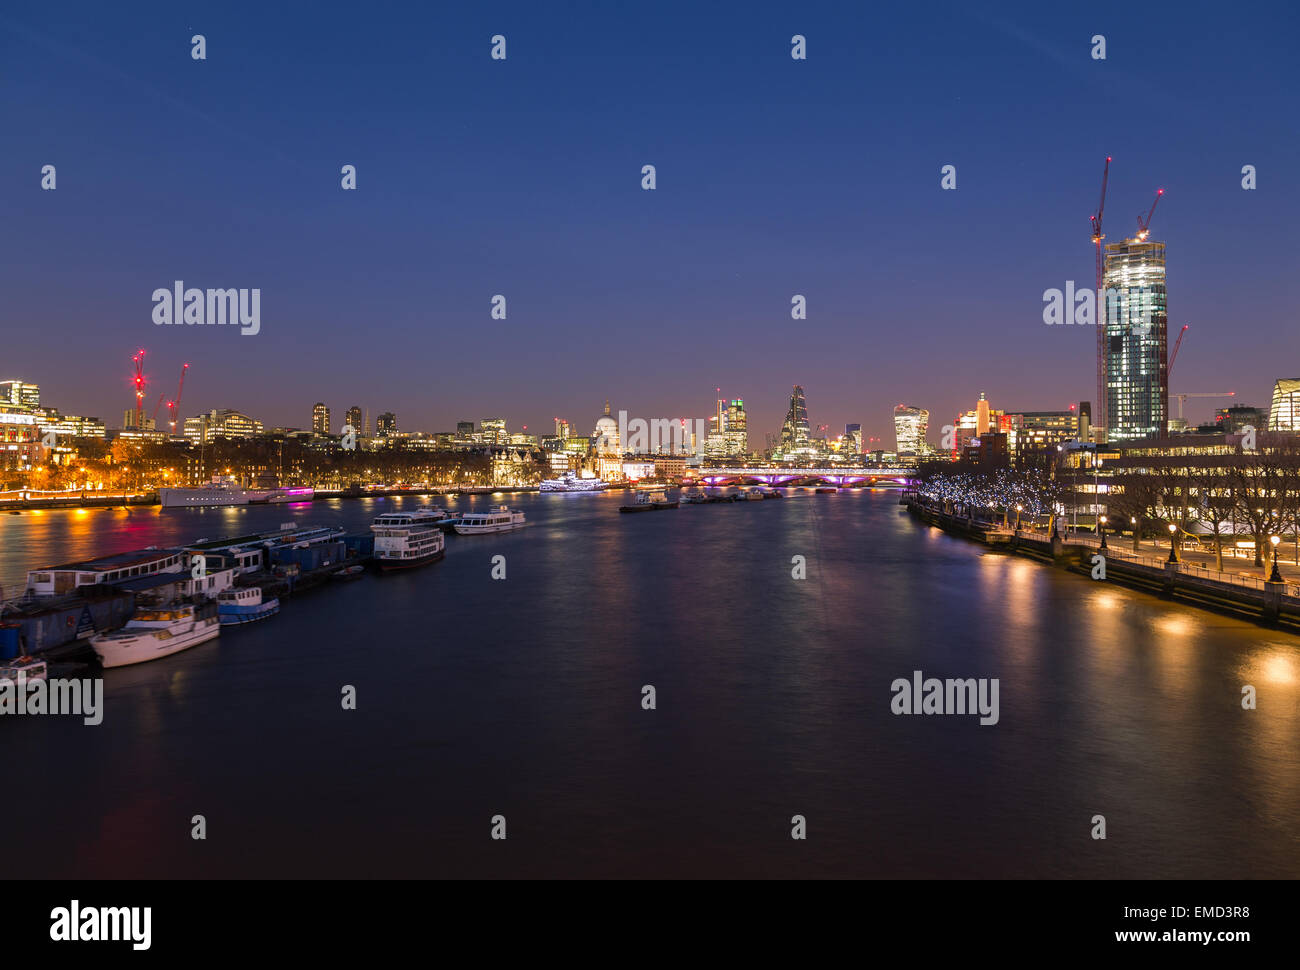 The City of London Skyline at Dusk showing boats, buildings and construction. There is copy space in the image. Stock Photo